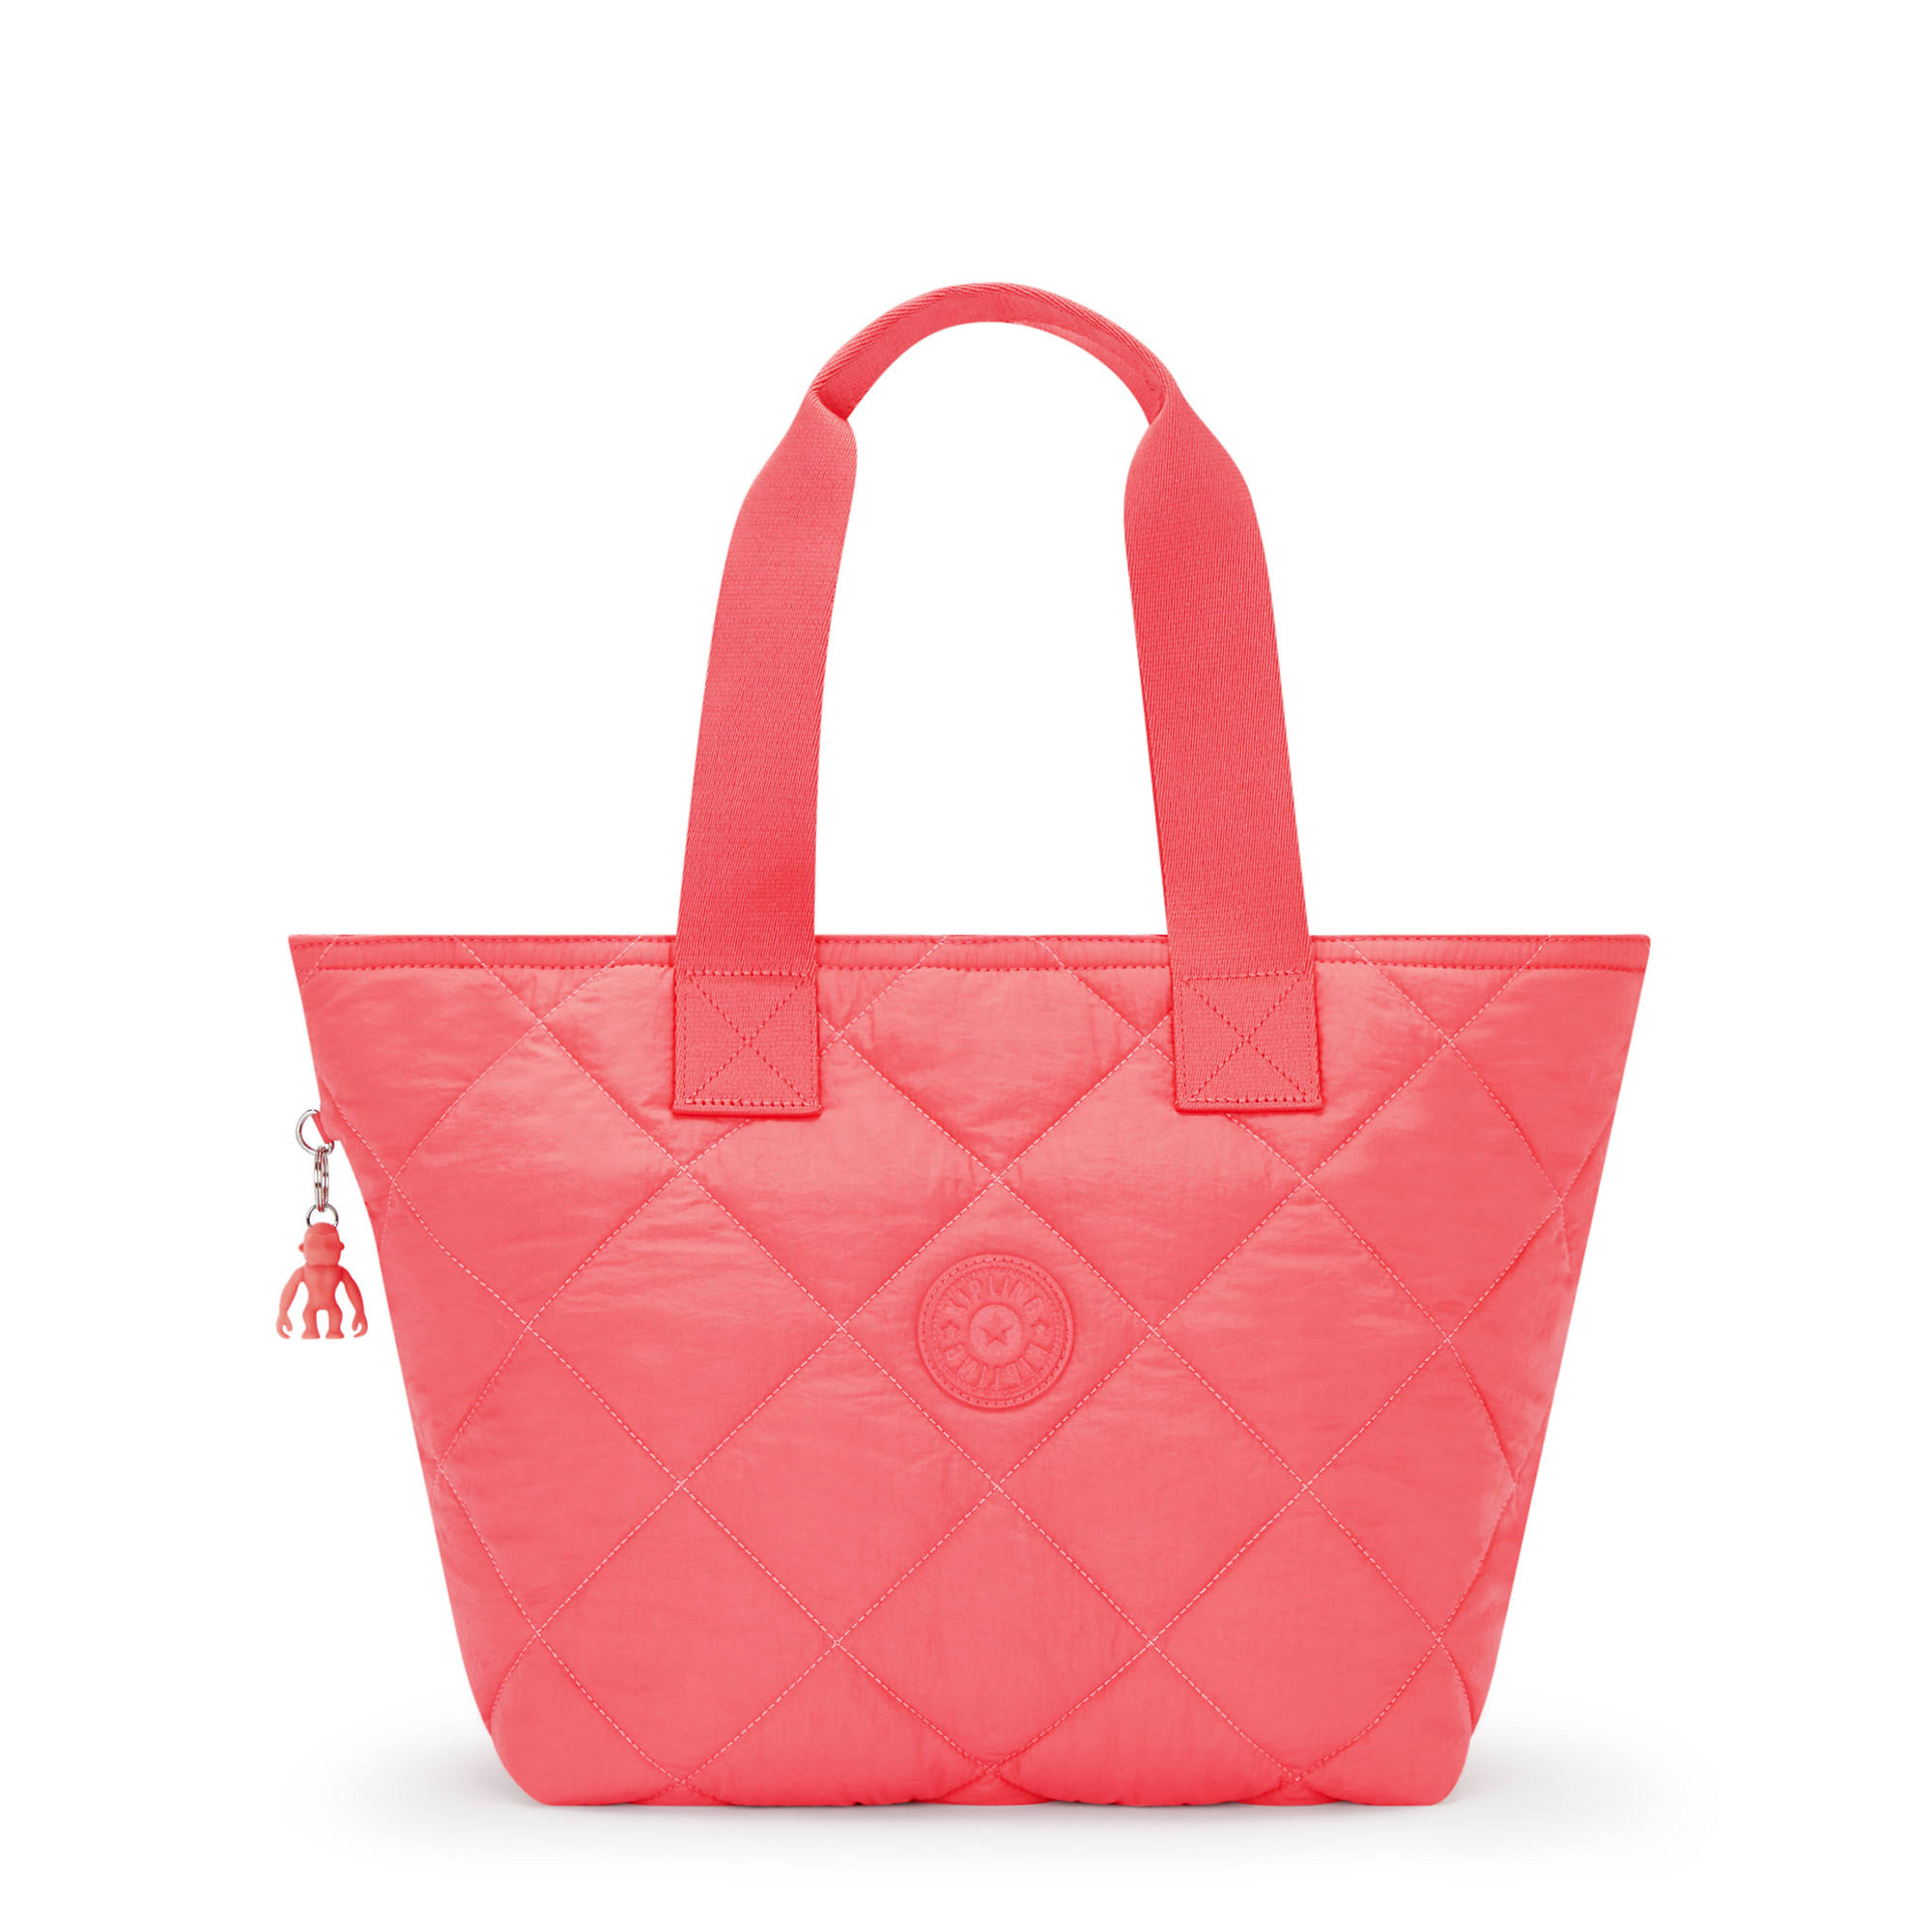 Kipling Irica Quilted Tote Bag Cosmic Pink Quilt